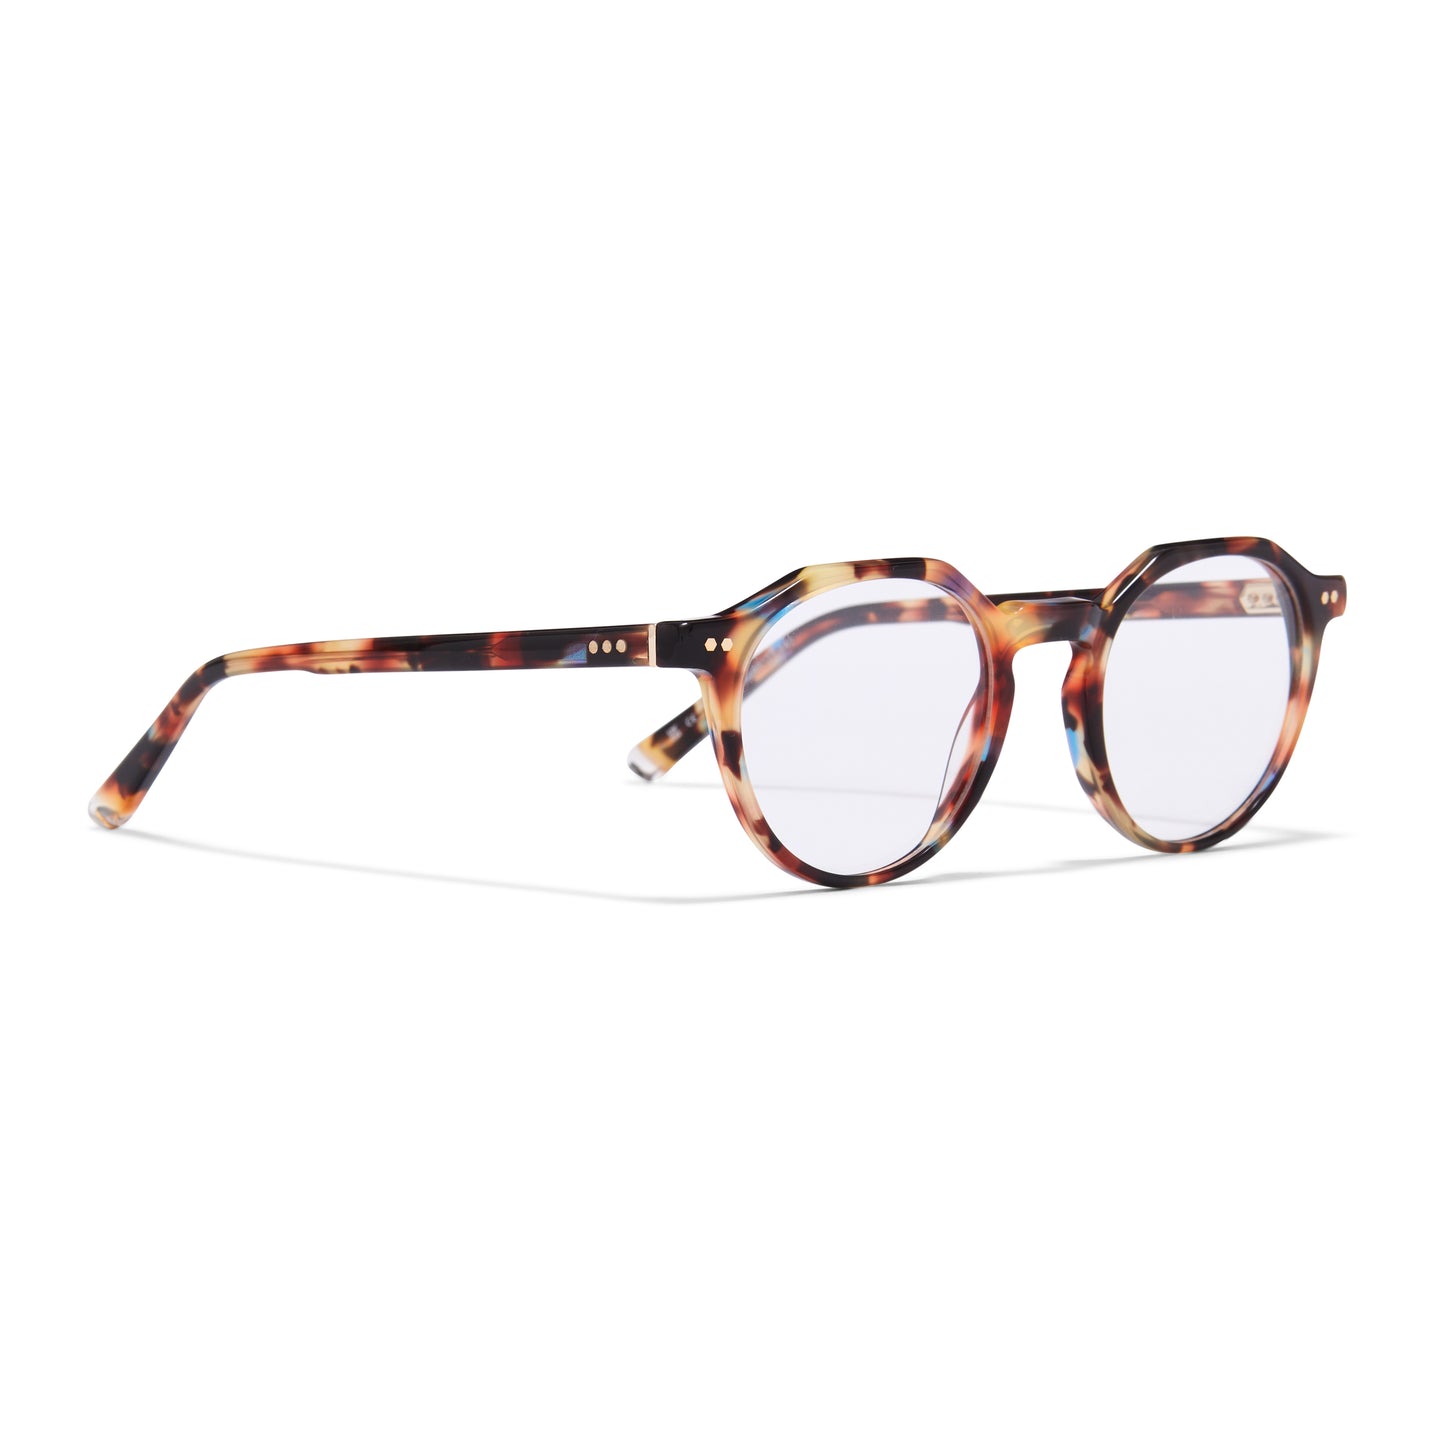 TM019-C5 Tortoiseshell with Blue Injection /Gold